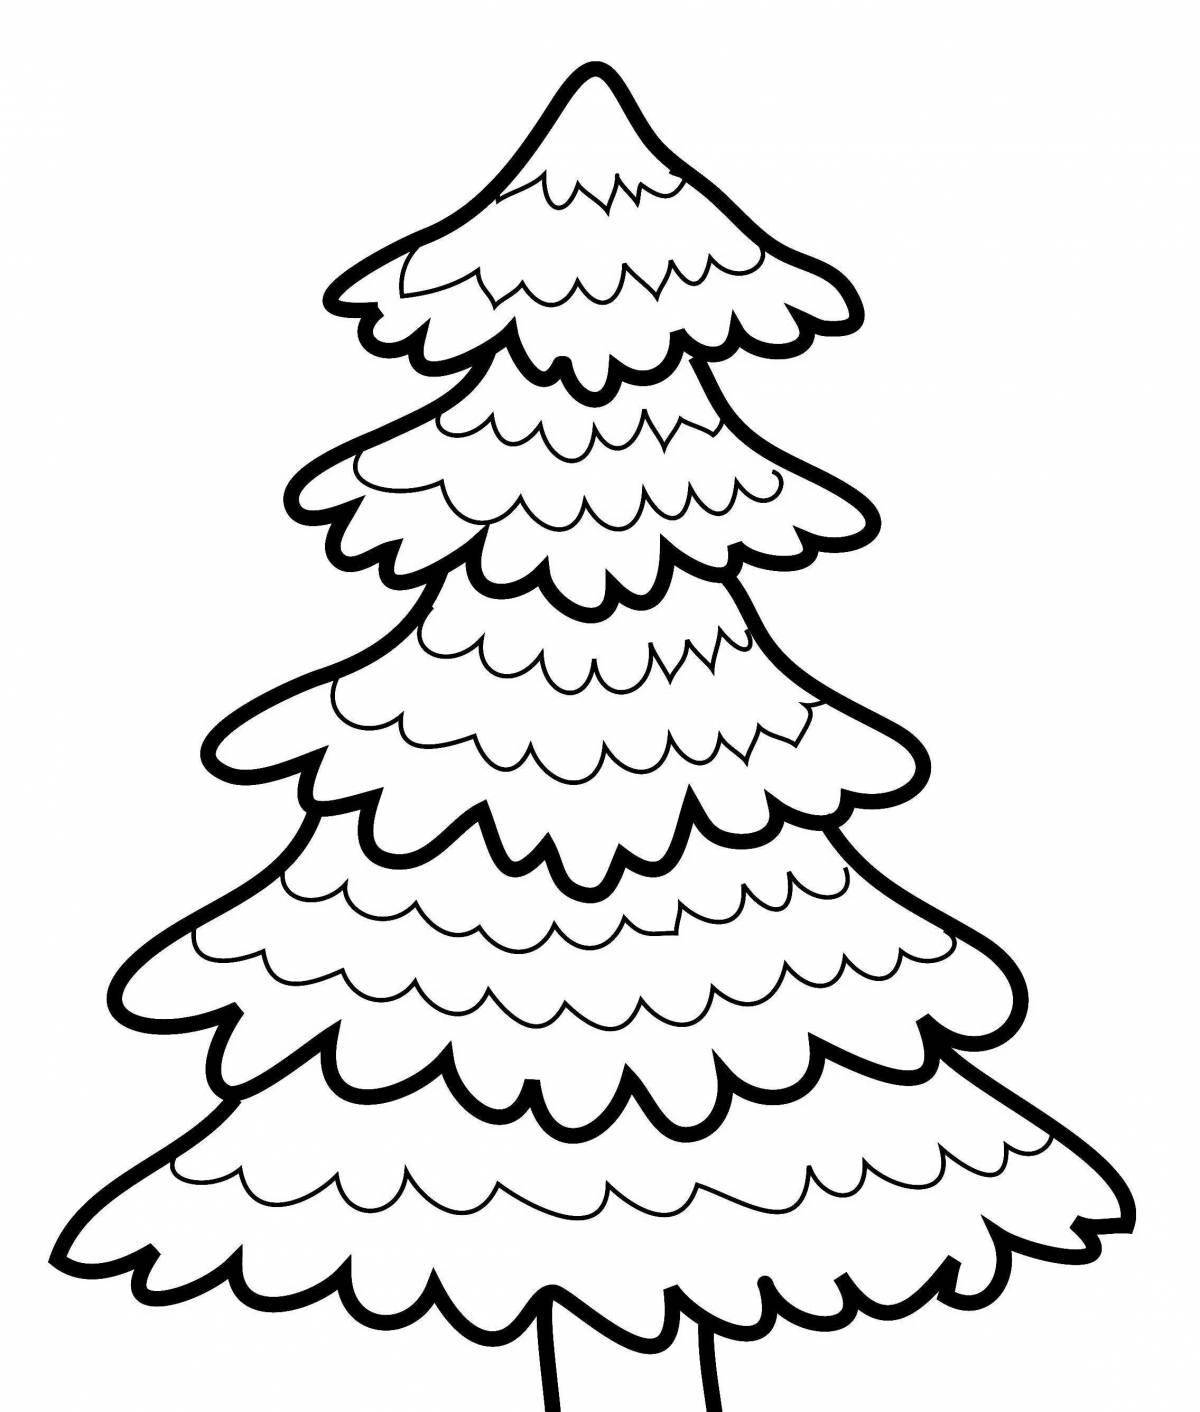 Coloring book sparkling Christmas tree